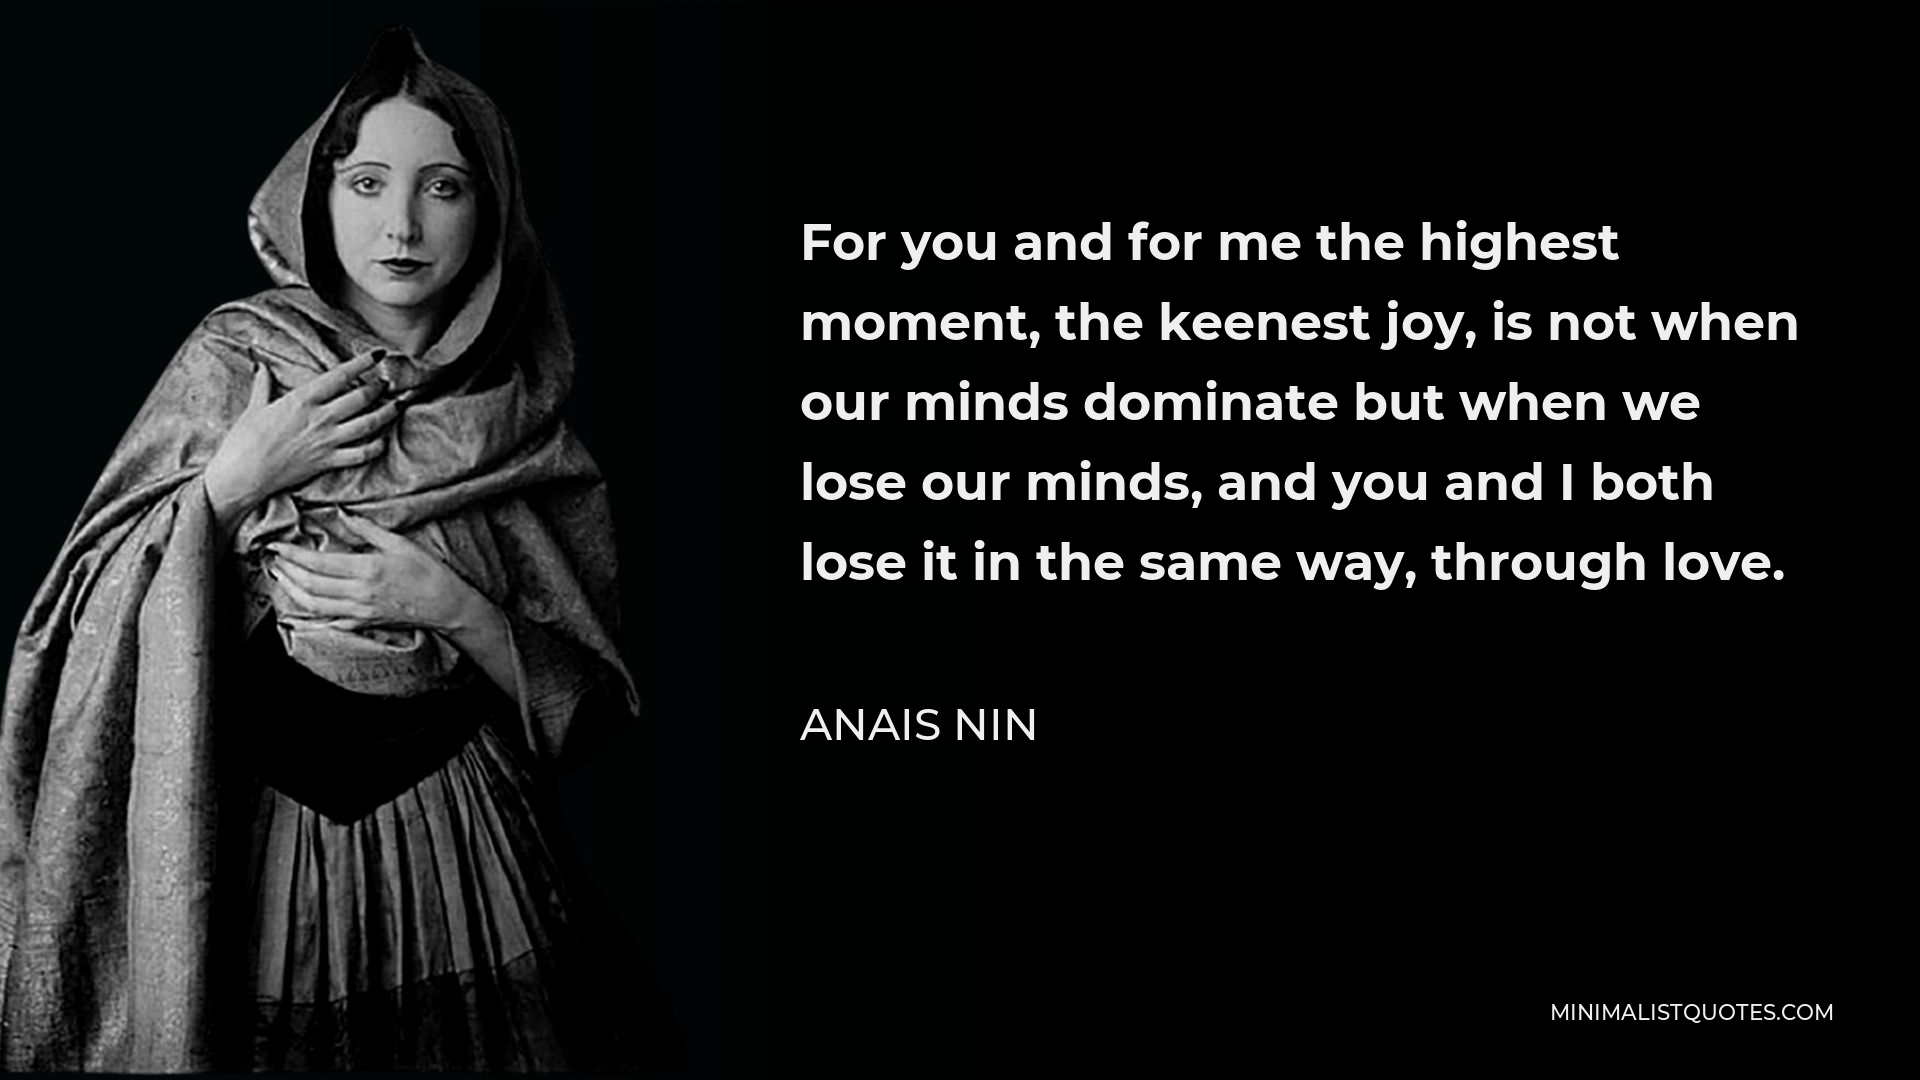 Anais Nin Quote - For you and for me the highest moment, the keenest joy, is not when our minds dominate but when we lose our minds, and you and I both lose it in the same way, through love.